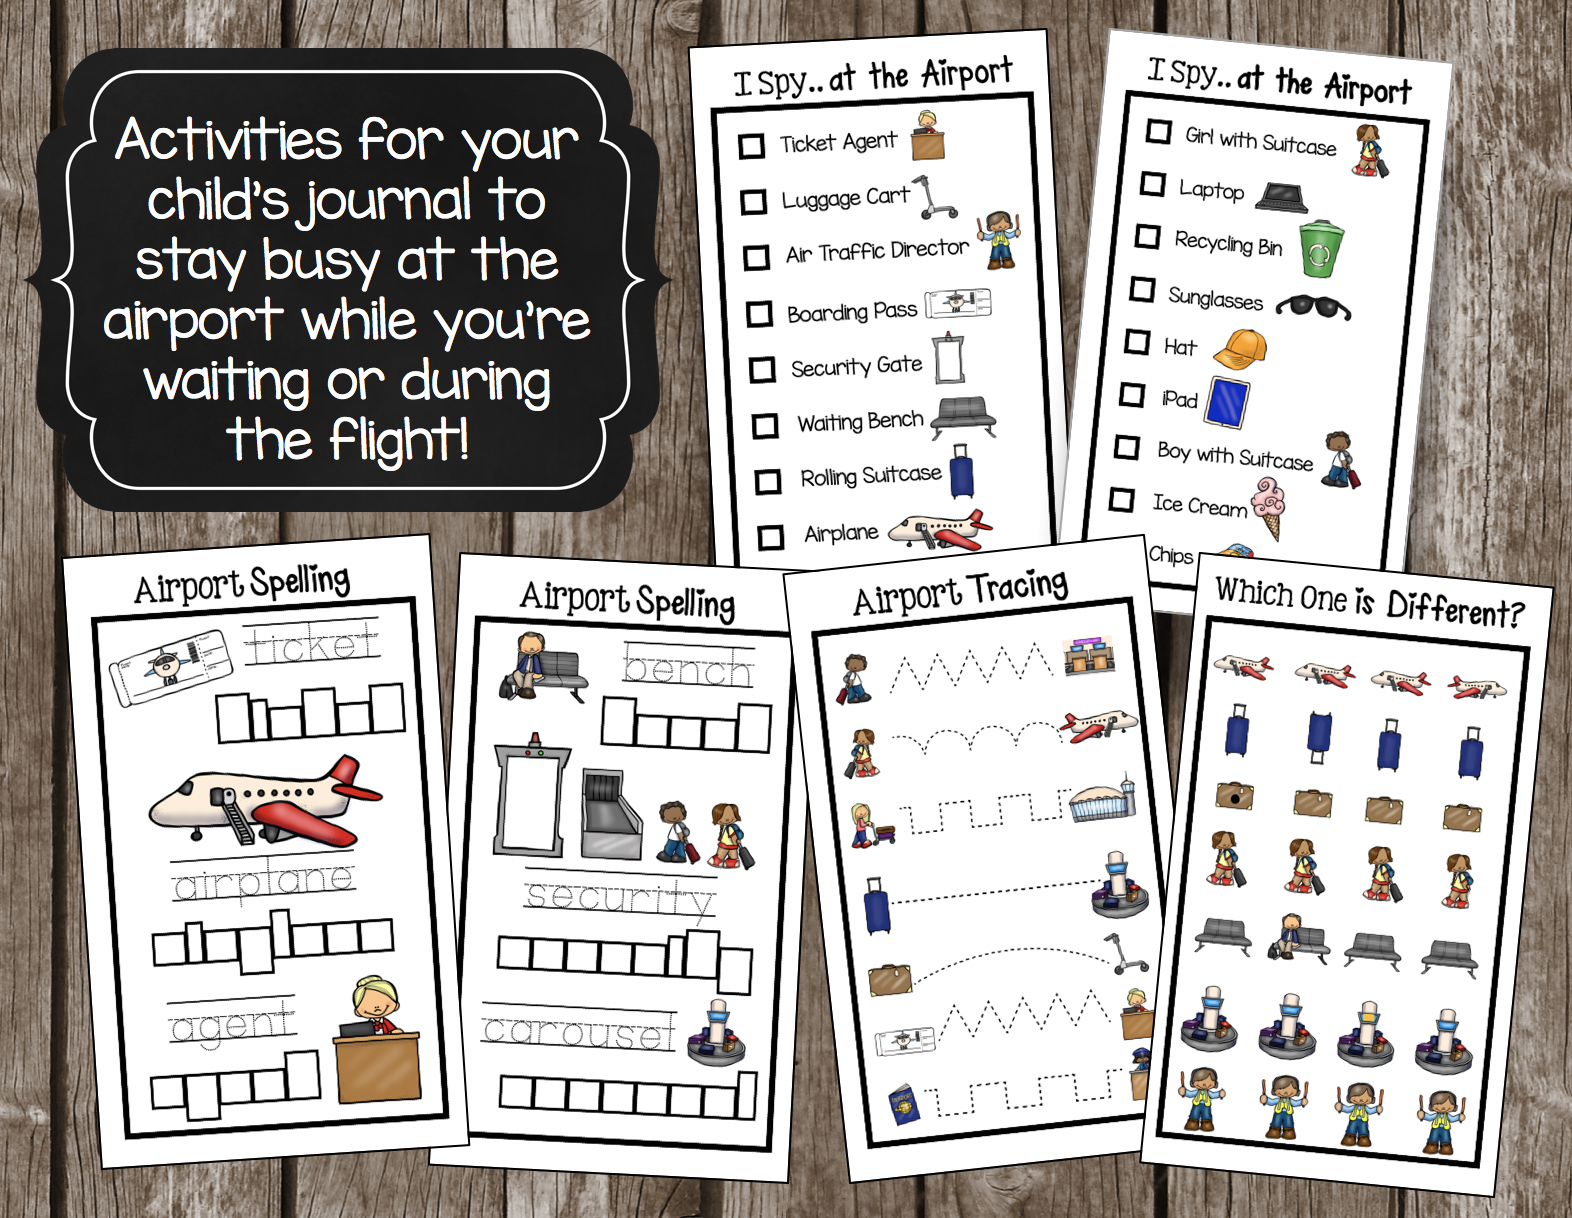 Airplane Activities for Kids with Free Printables - Every Star Is Different